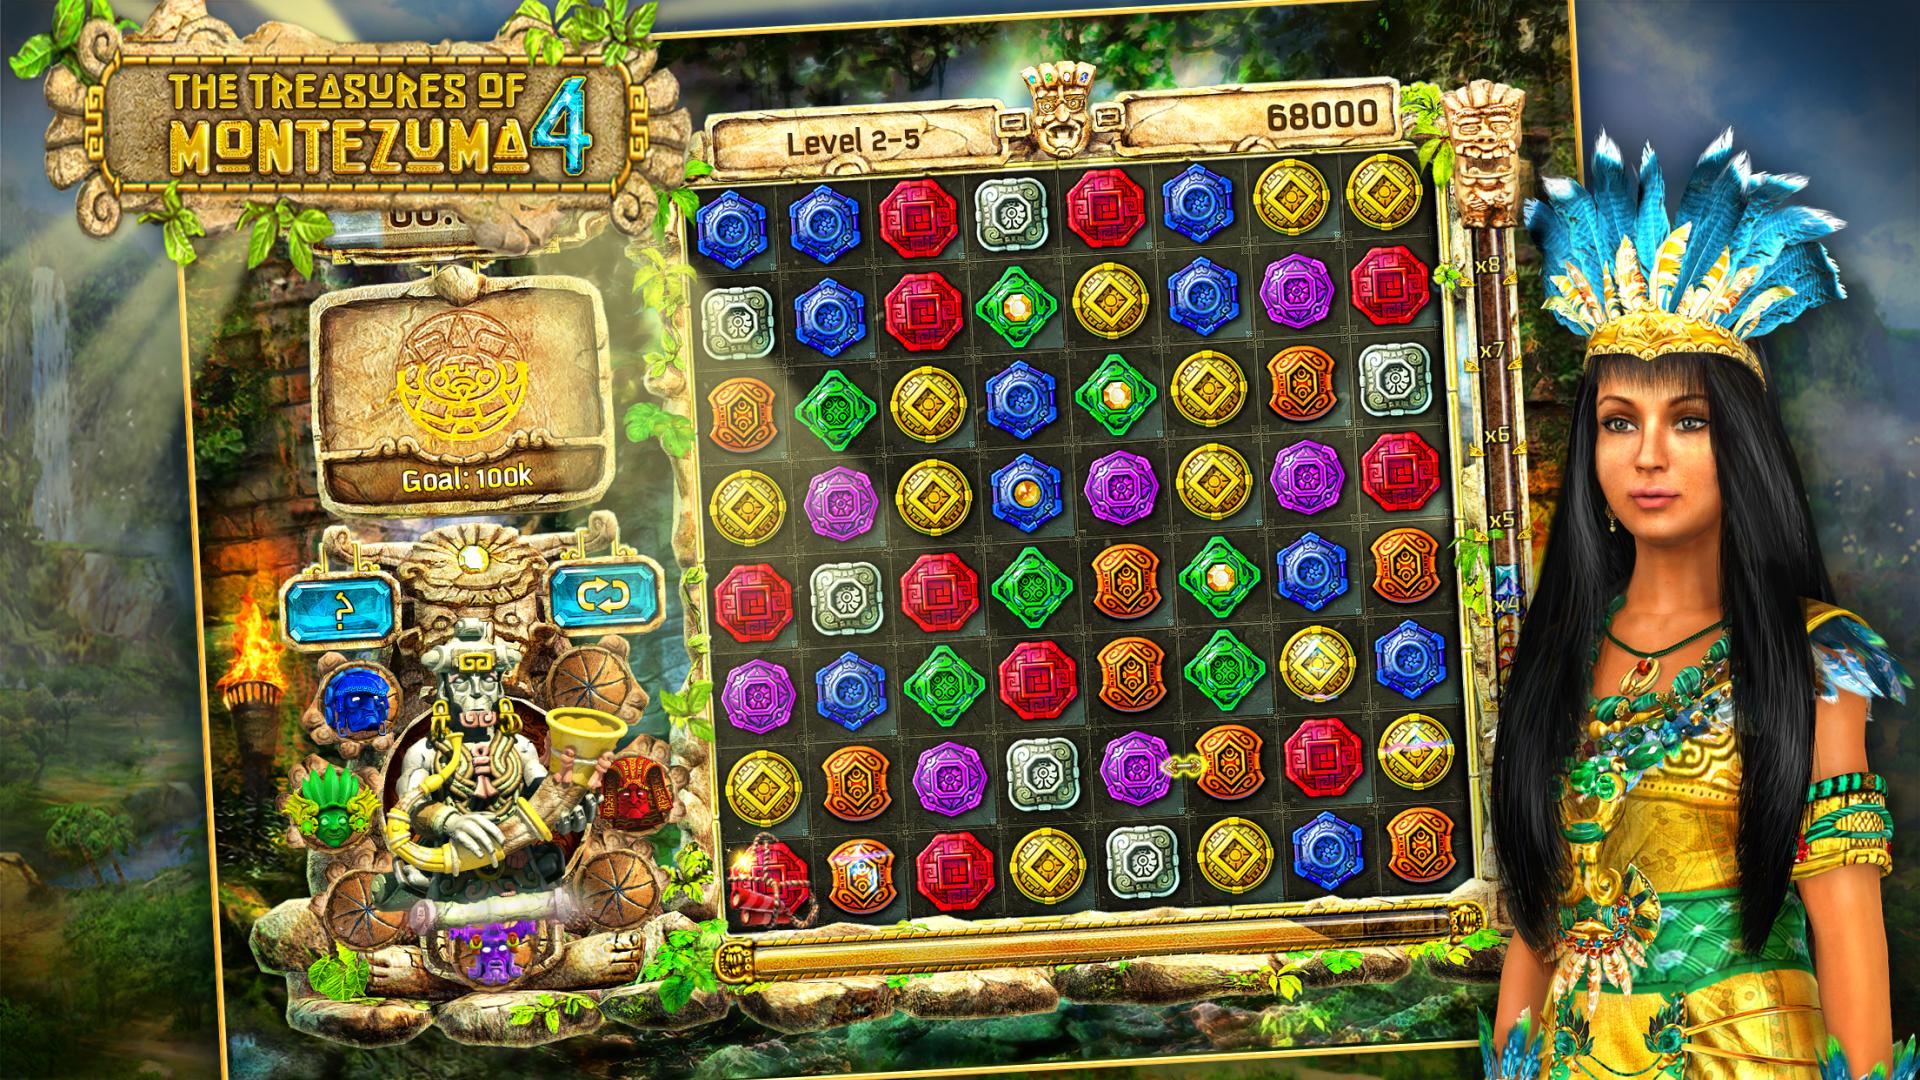 Treasures of montezuma 2 free download for android 8